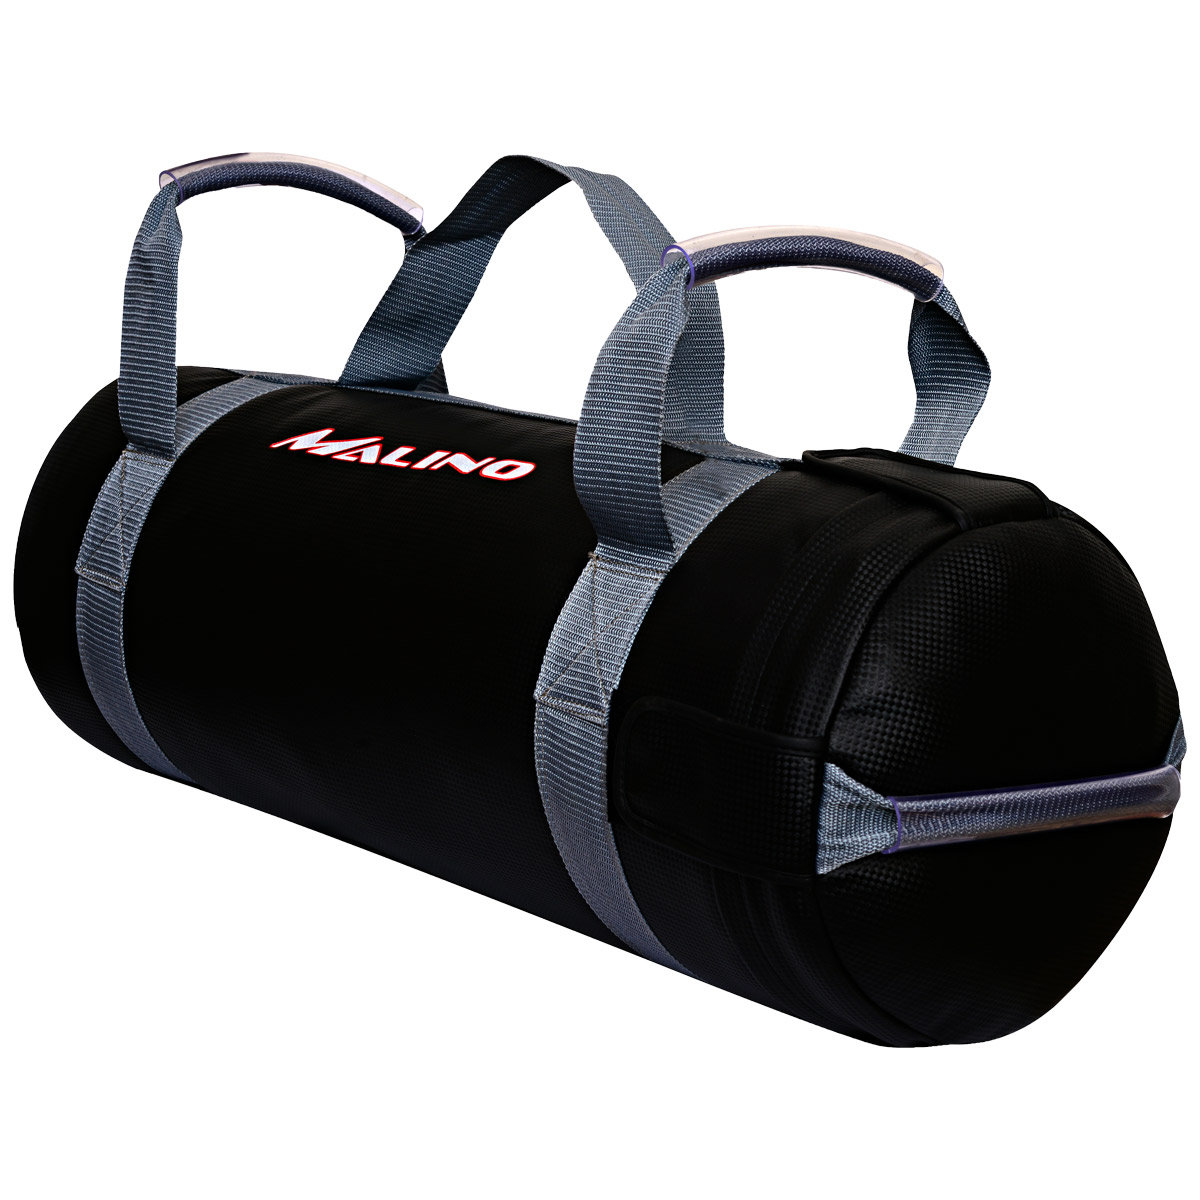 Malino FILLED 10KG Power Bag Sand Bag MMA Gym Fitness Weight Lifting Black Red